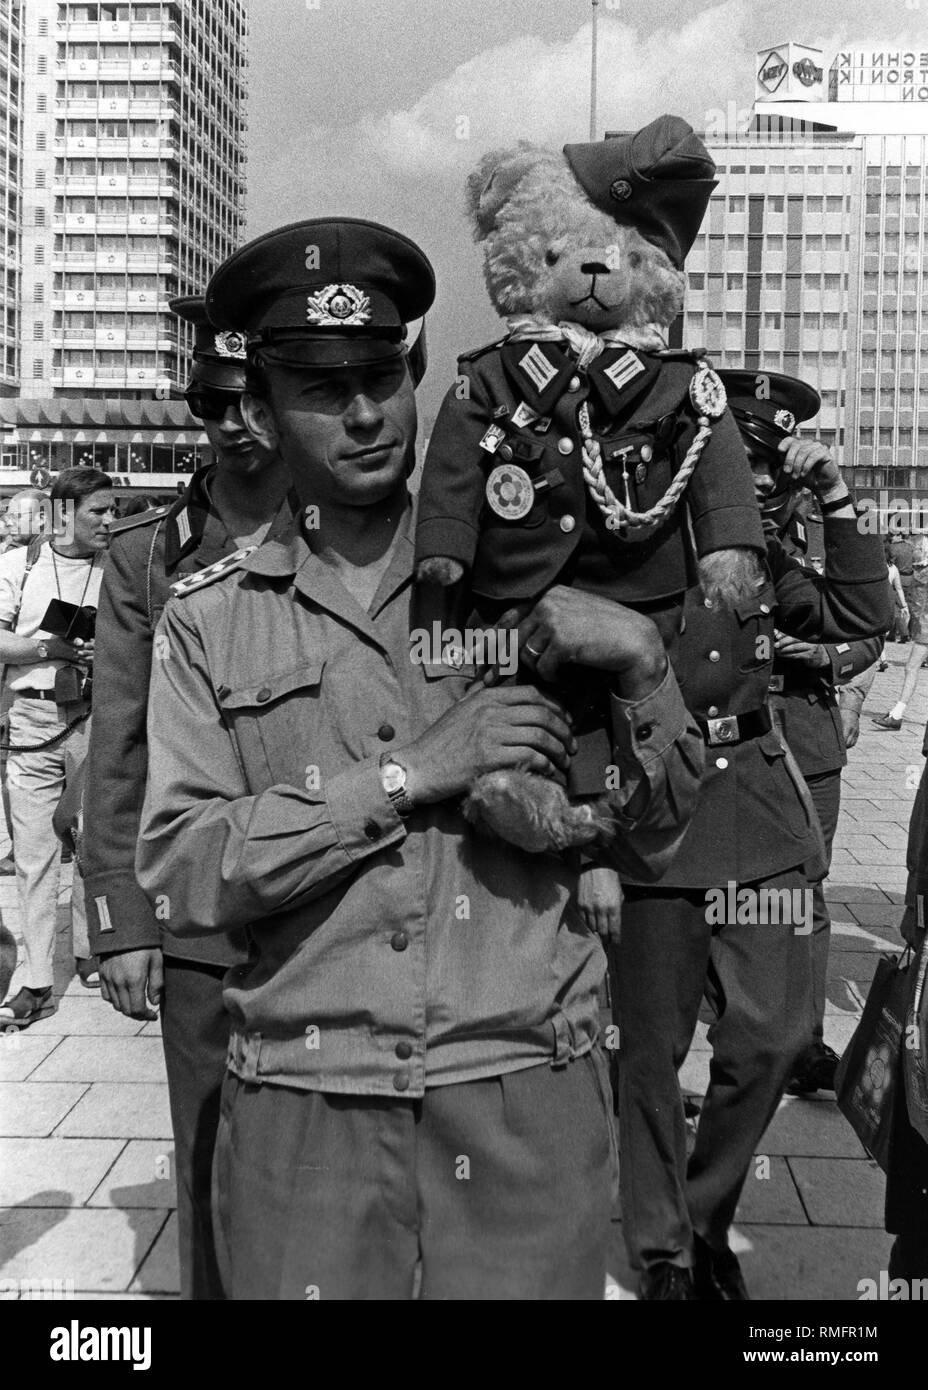 Soldiers of the GDR People's Army with a teddy bear as a mascot in army uniform during the World Festival from 28 July to 5 August 1973 on the Alexanderplatz in Berlin Stock Photo